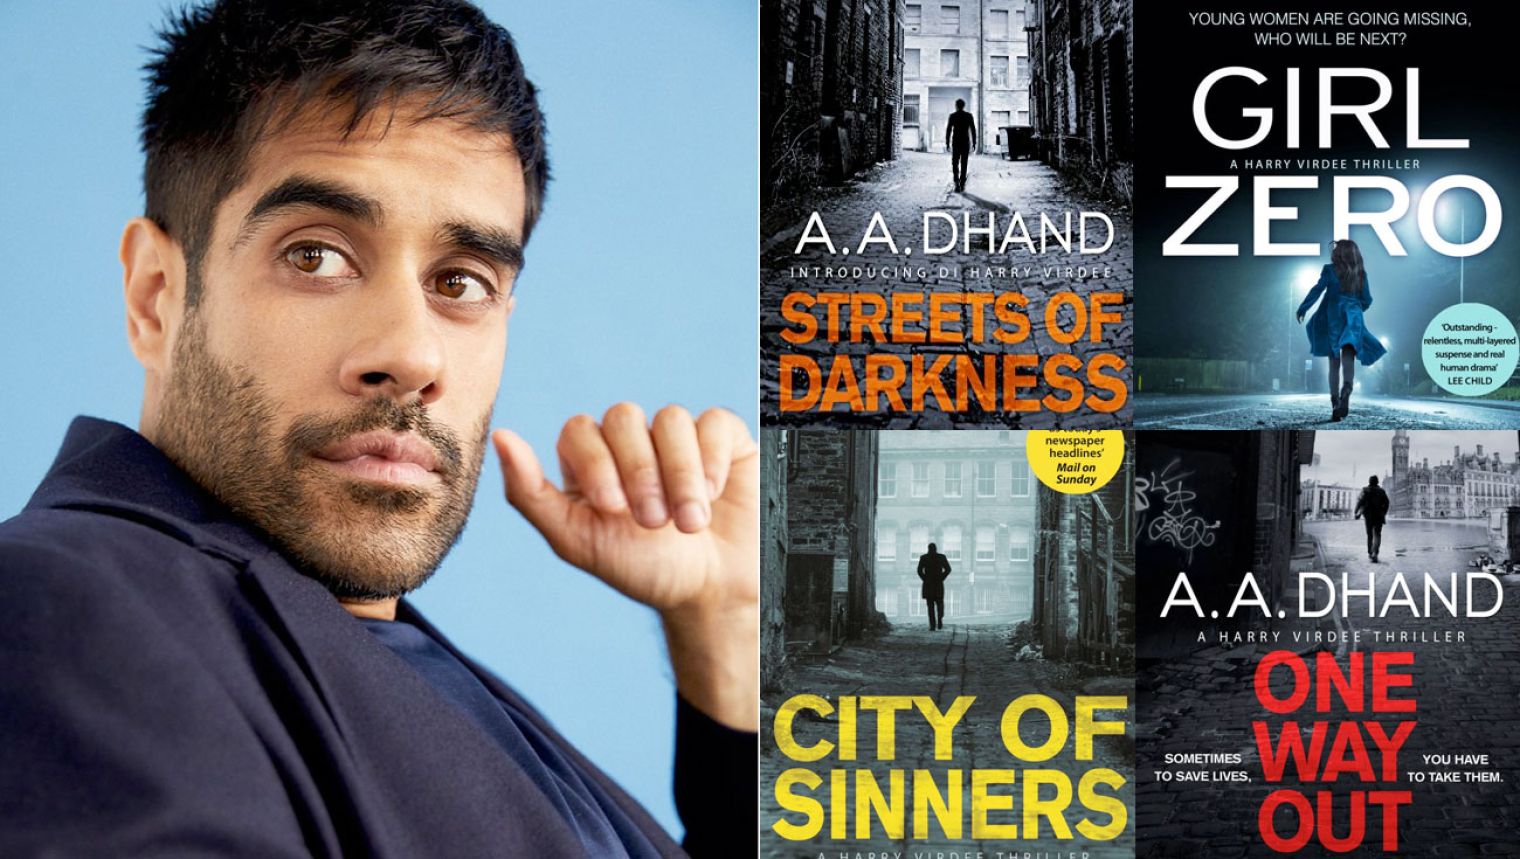 Sacha Dhawan has been cast as the lead in new 6-part BBC crime drama ‘Virdee’, based on the novels by A.A. Dhand